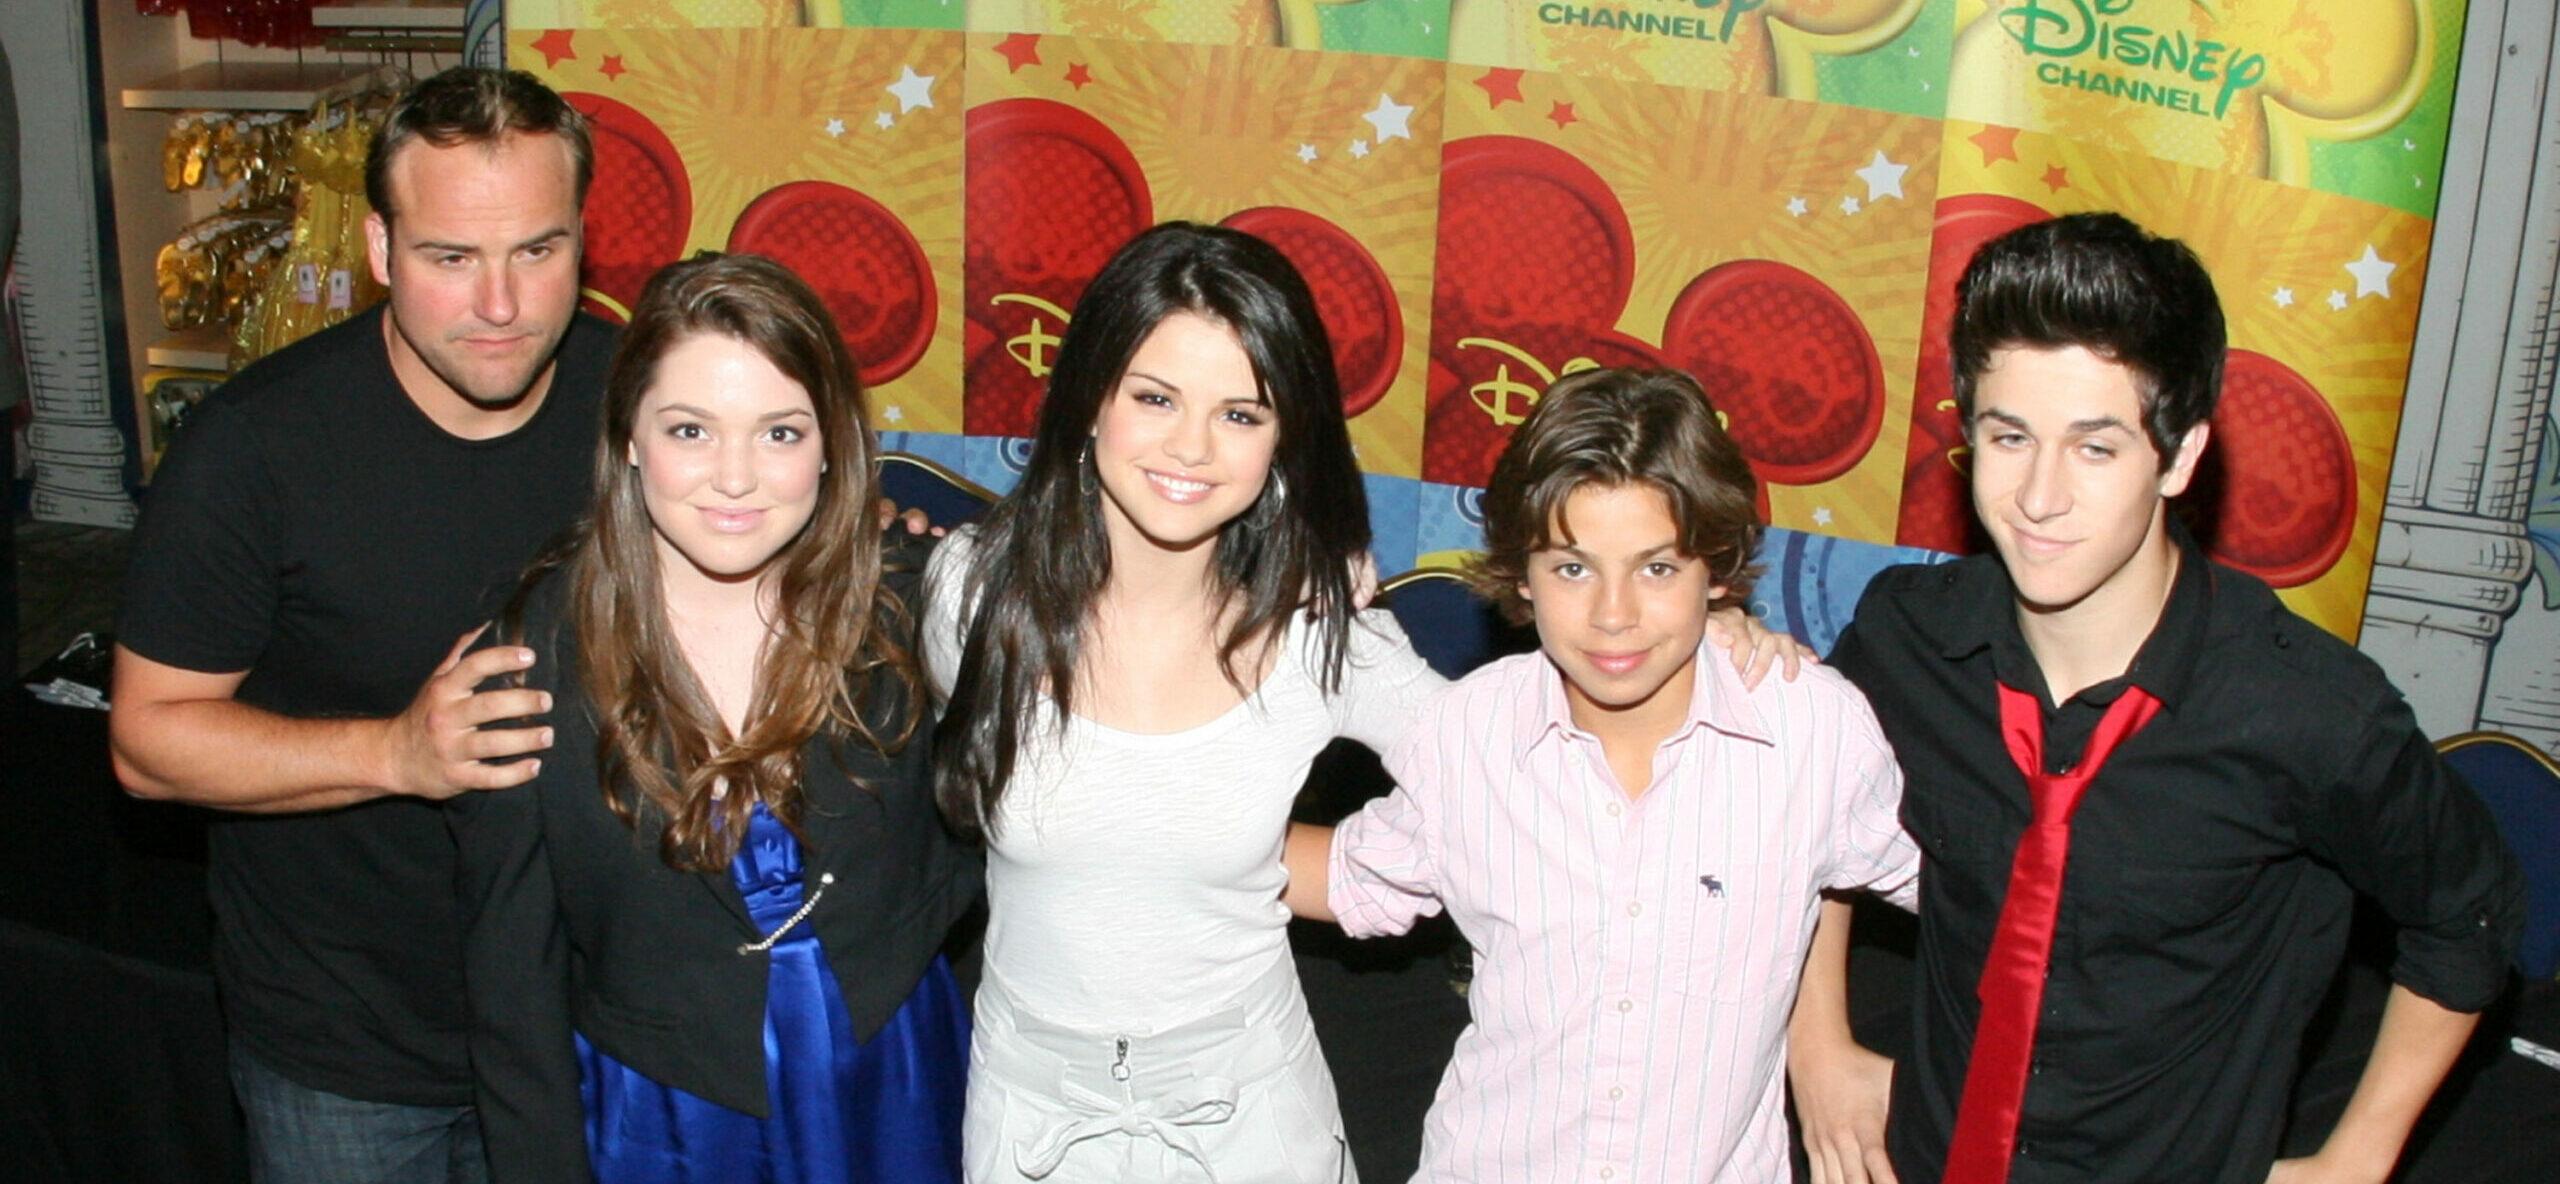 wizards of waverly place 070908